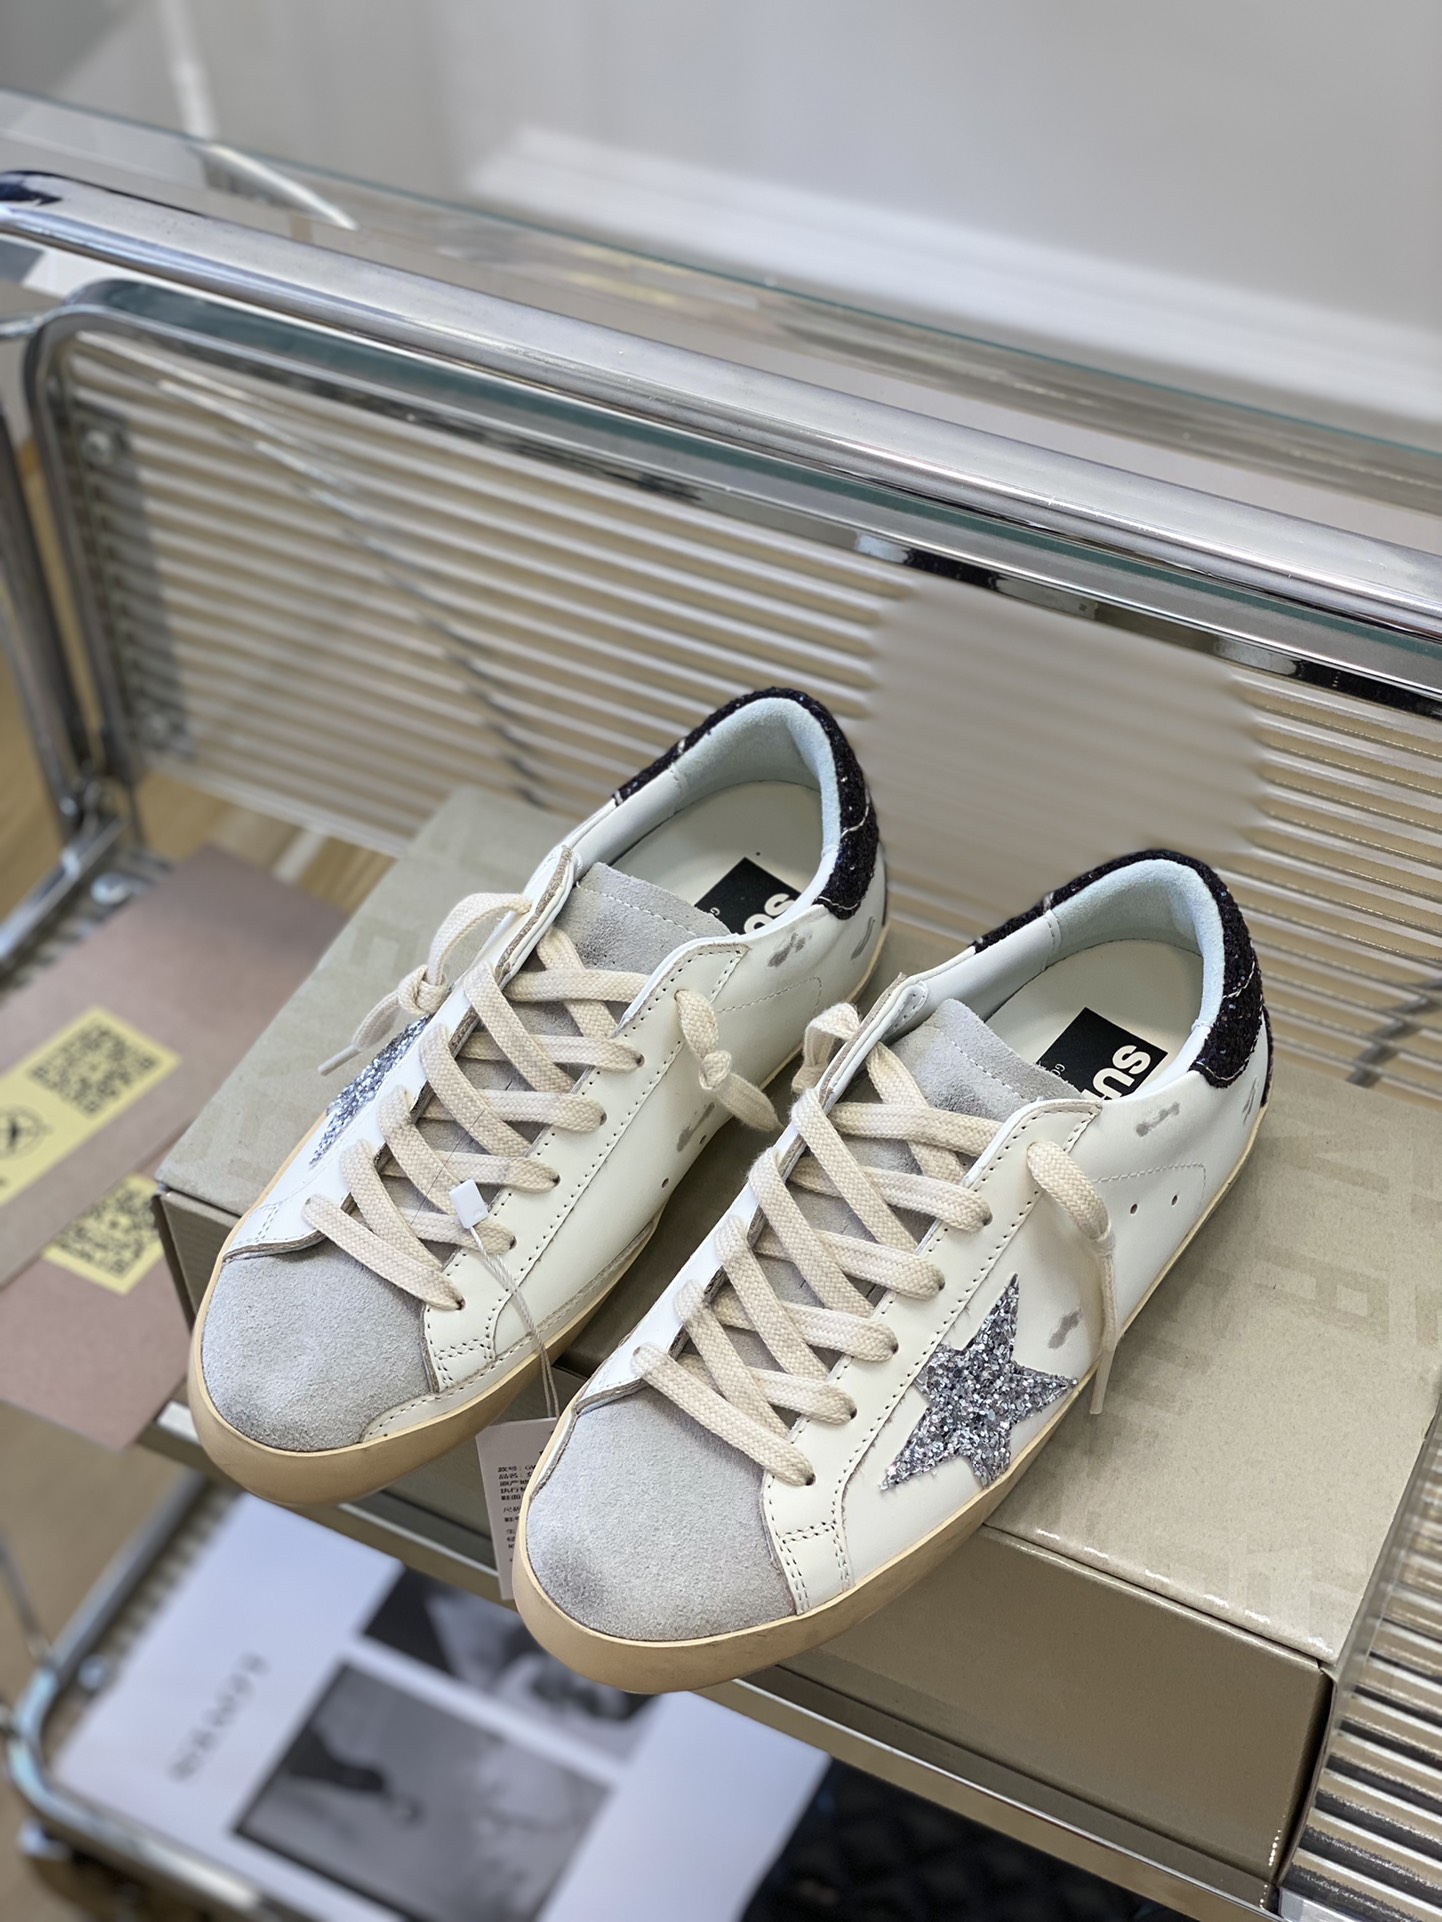 Golden Goose Skateboard Shoes At Cheap Price
 Doodle